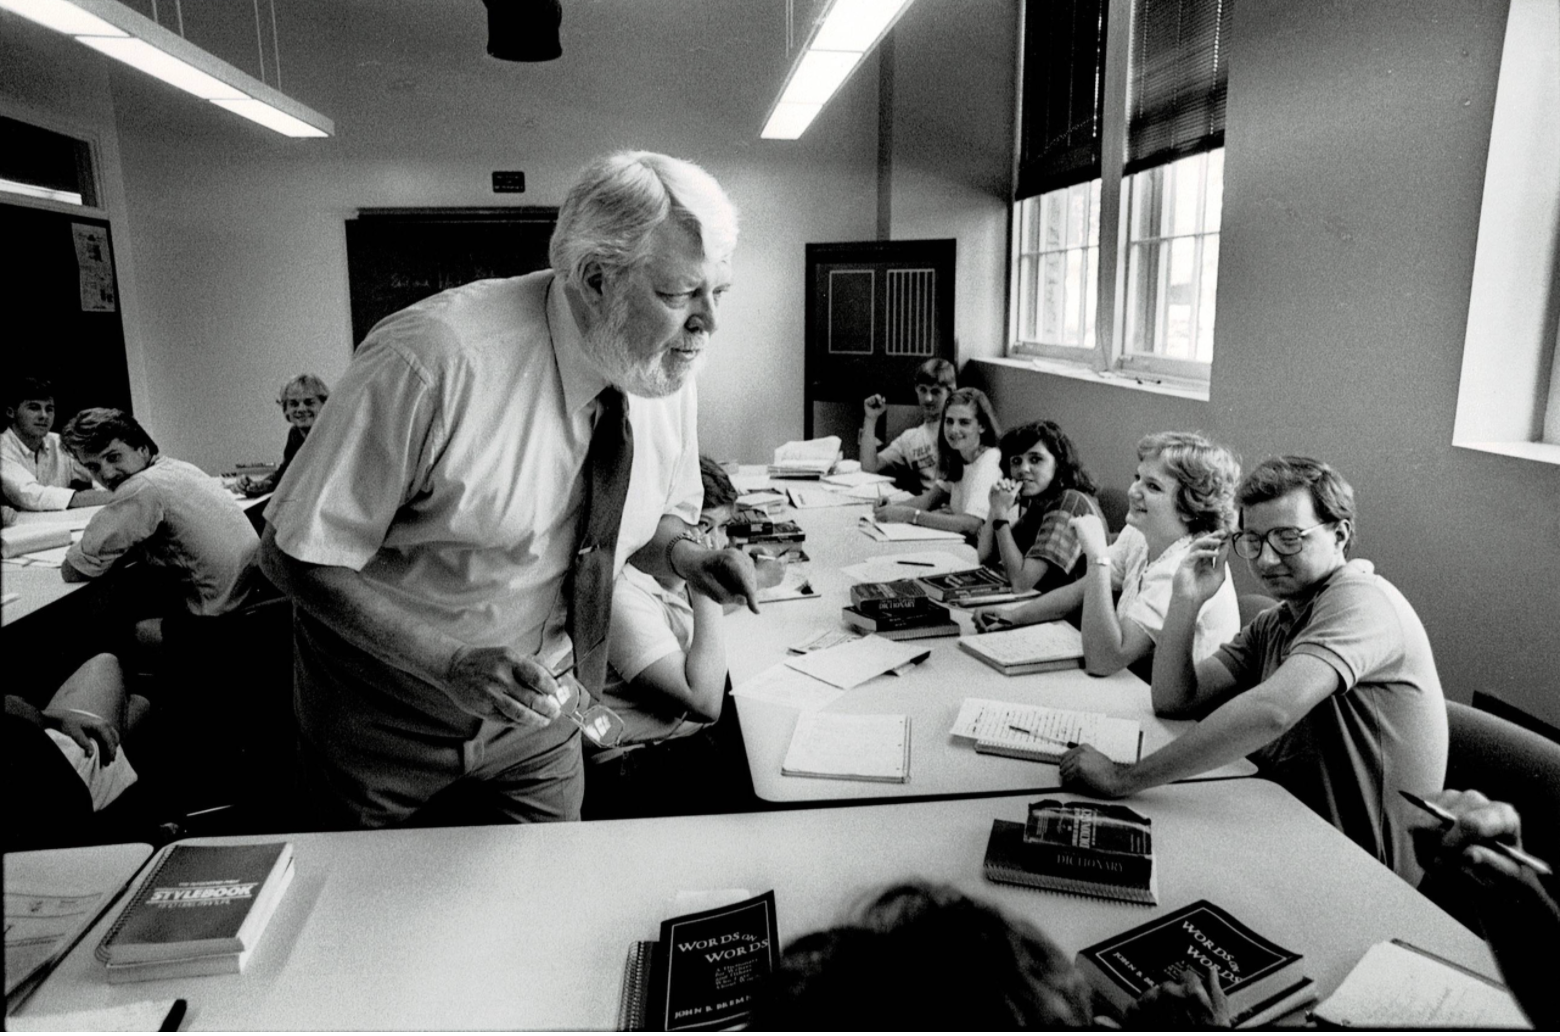 John Bremner speaks with students in a classroom